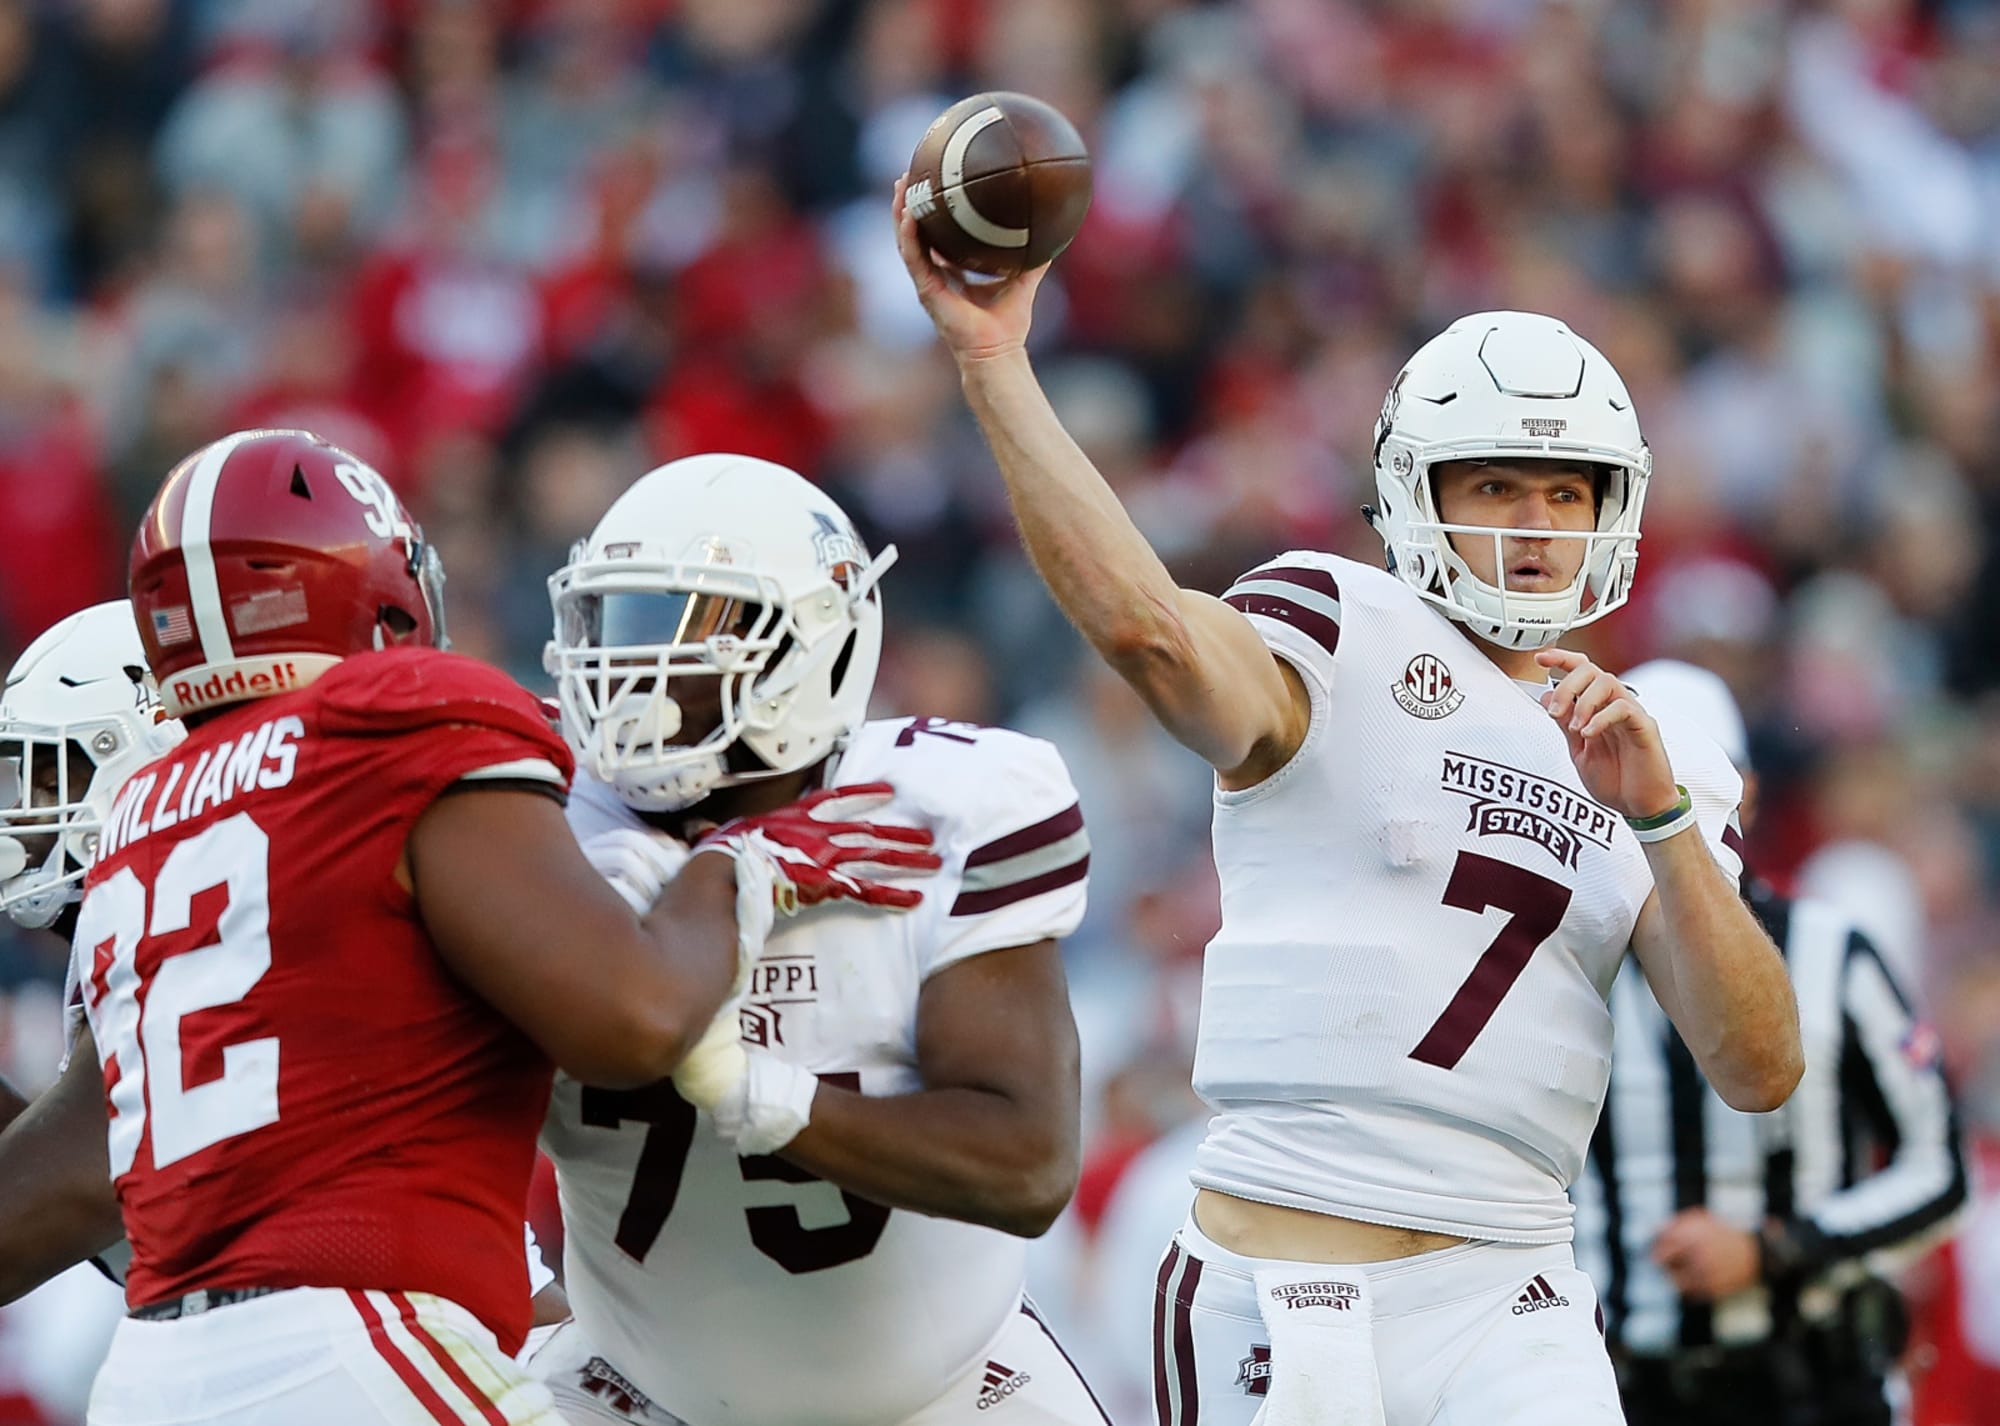 Alabama vs mississippi state football best over under bets today